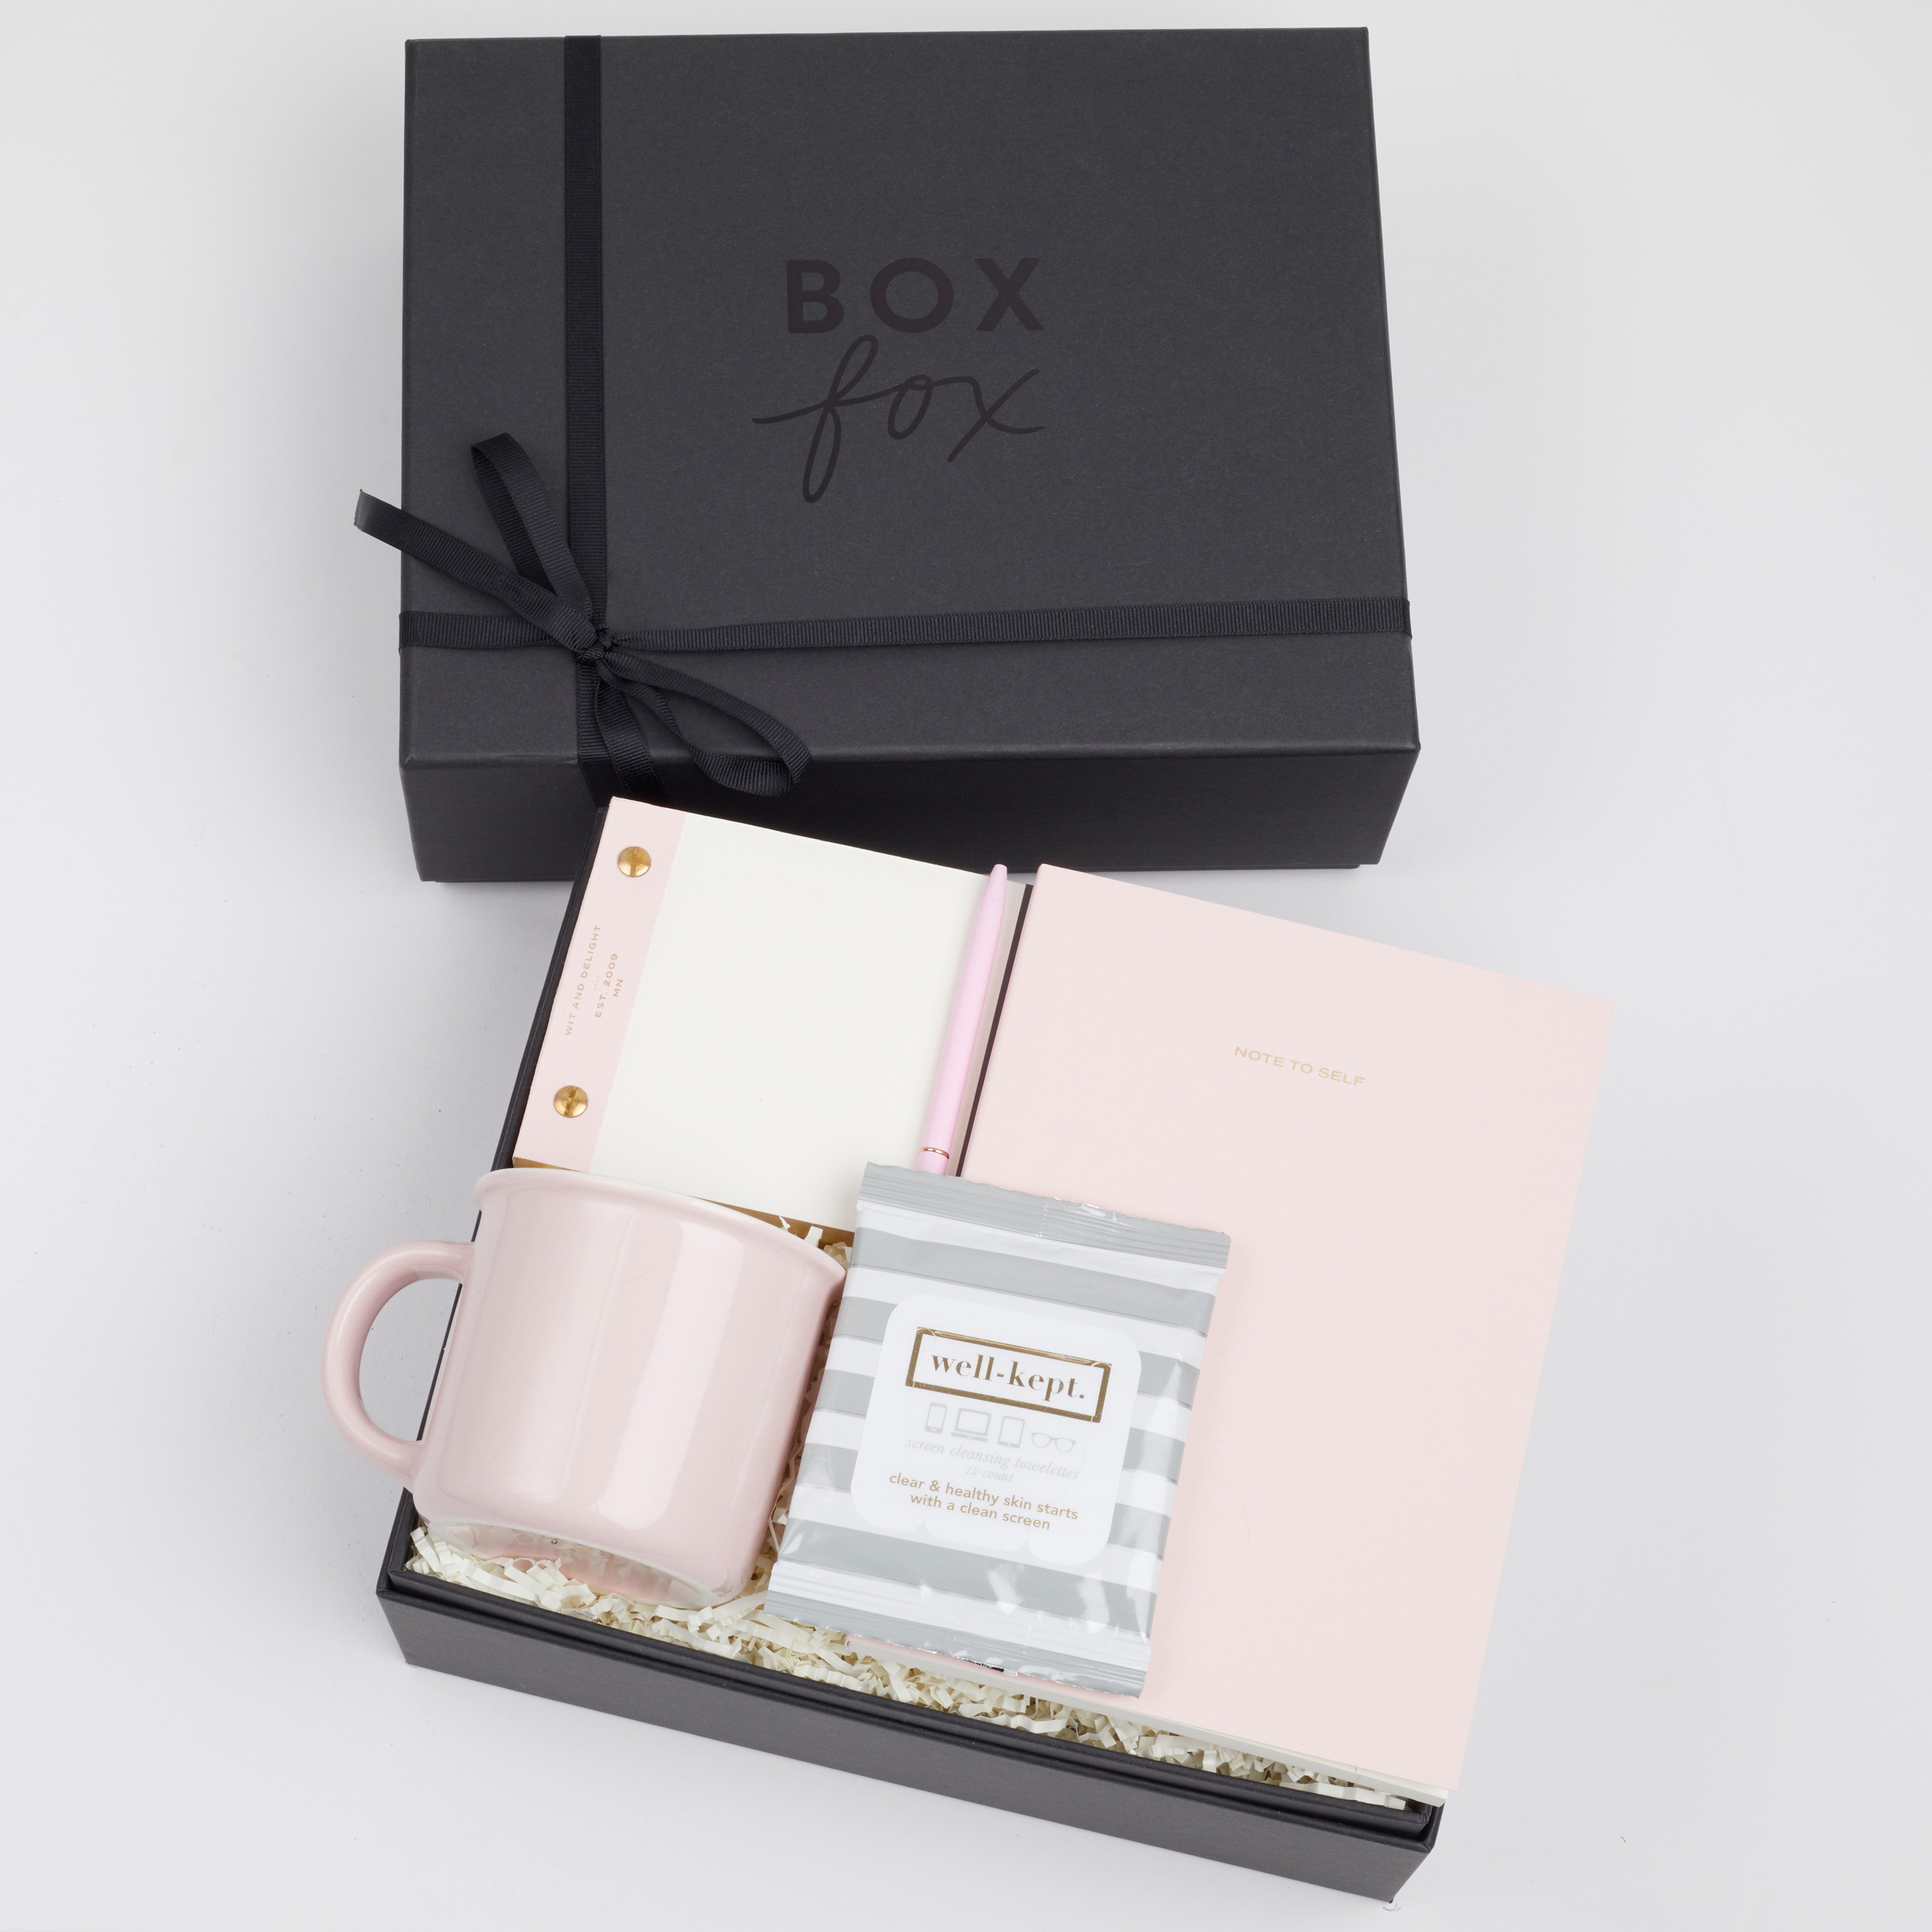 BOXFOX black Hustle Gift Box packed with Wit &amp; Delight Pink Note to Self Journal, BOXFOX Pink Ceramic Mug, Well-Kept Hampton Tech Wipes, Sugarpaper Pink To Do Pad, and BOXFOX Pink Bullet Pen.